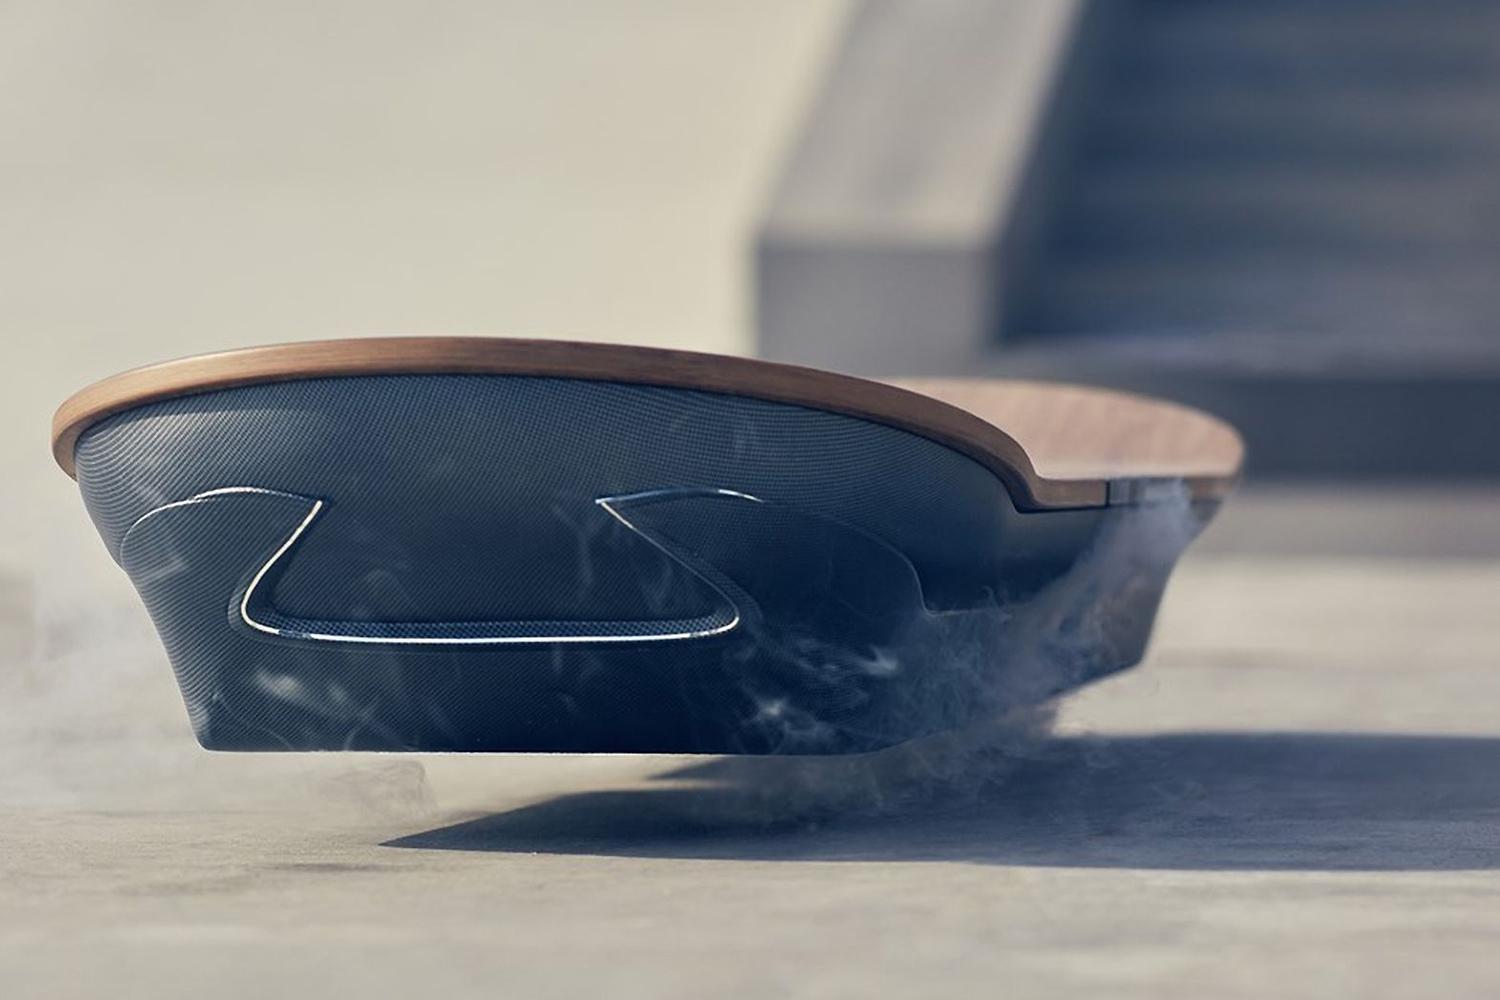 lexus hoverboard news pictures video amazing in motion slide hoeverboard 004 1500x1000